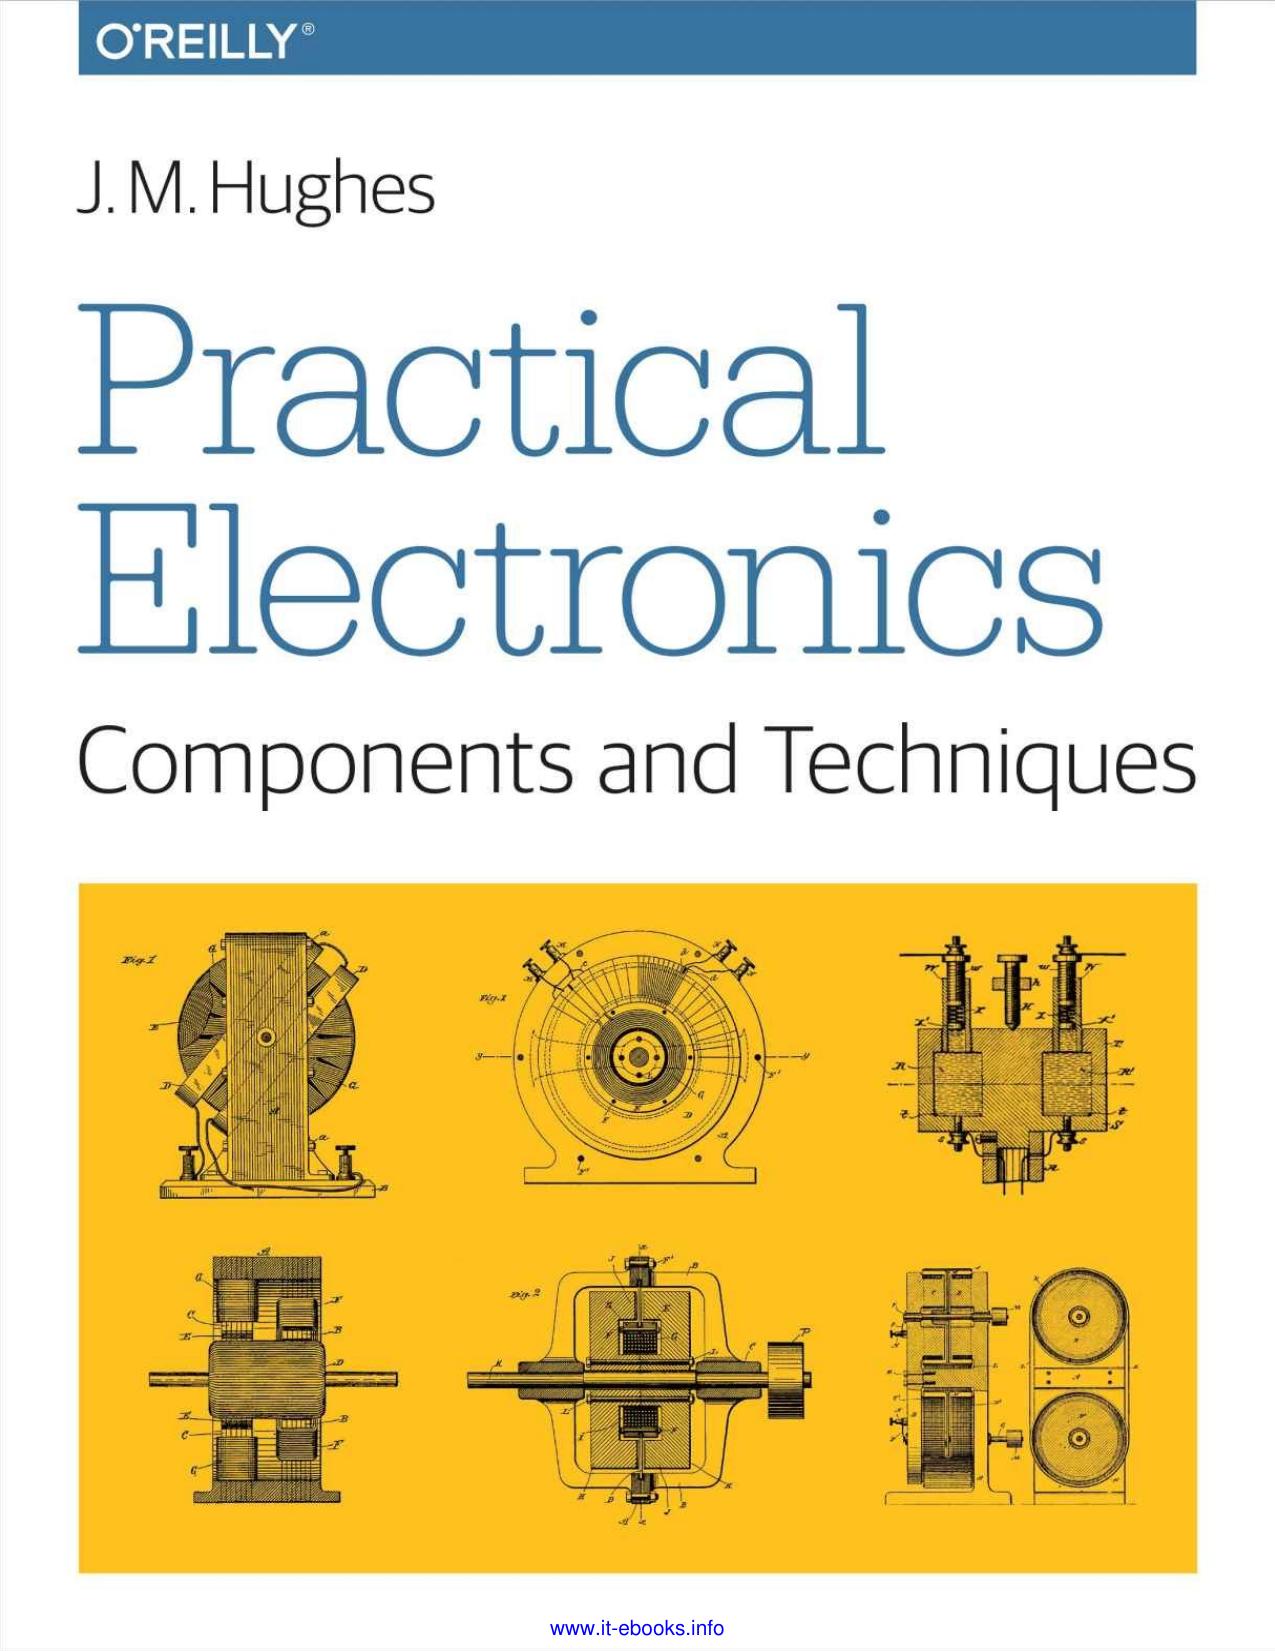 Practical Electronics: Components and Techniques: Components and Techniques